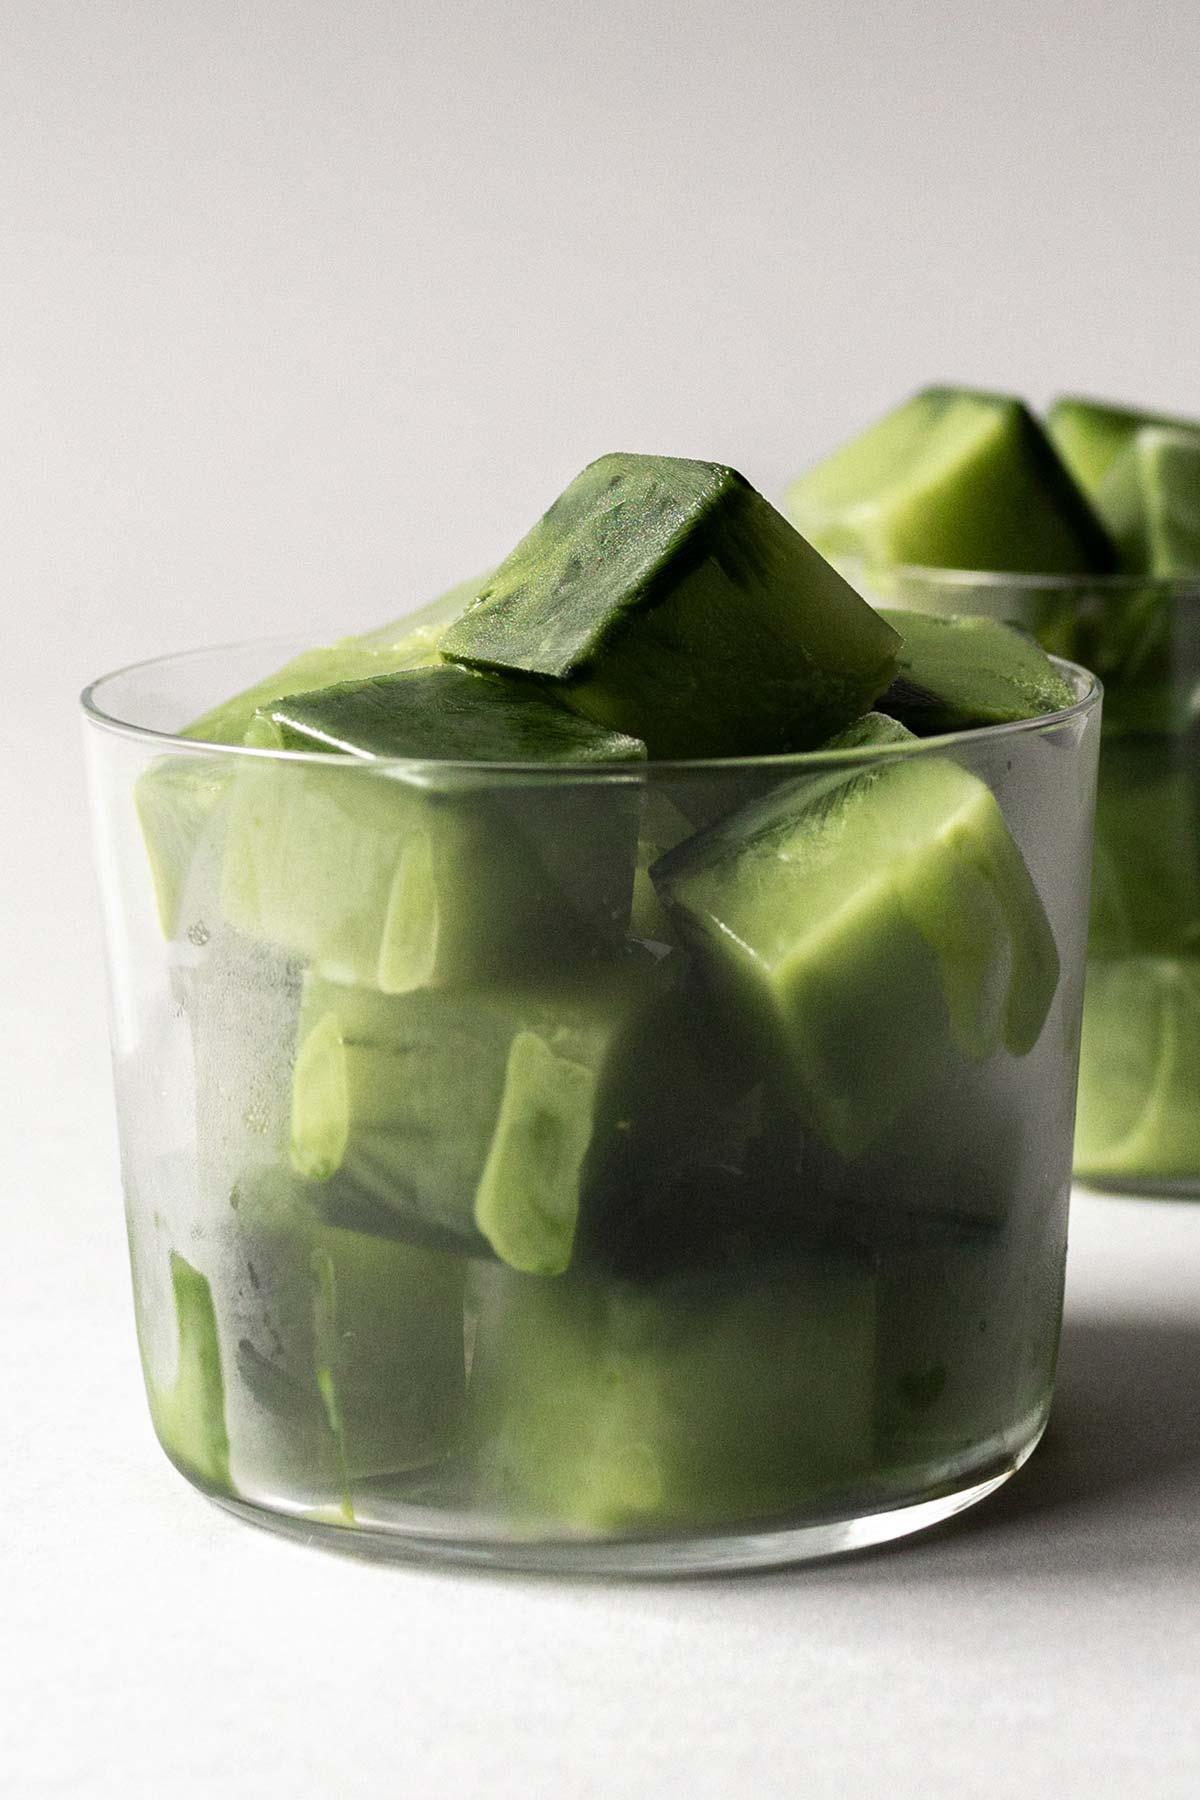 Matcha Ice Cubes in clear glass.